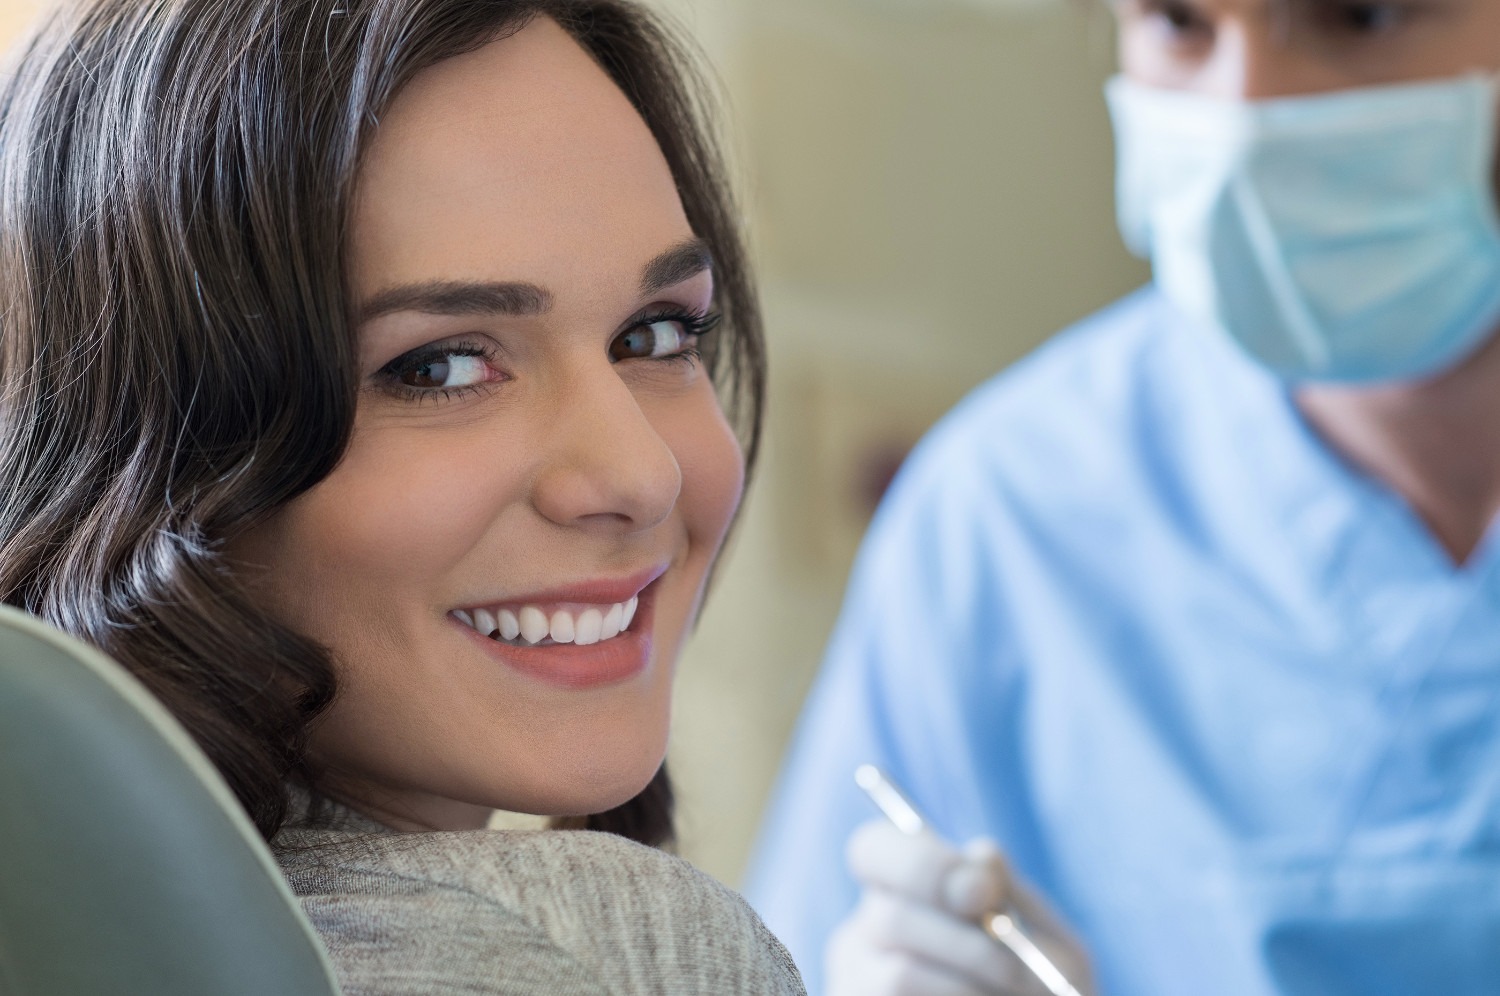 Young woman at Dental appointment